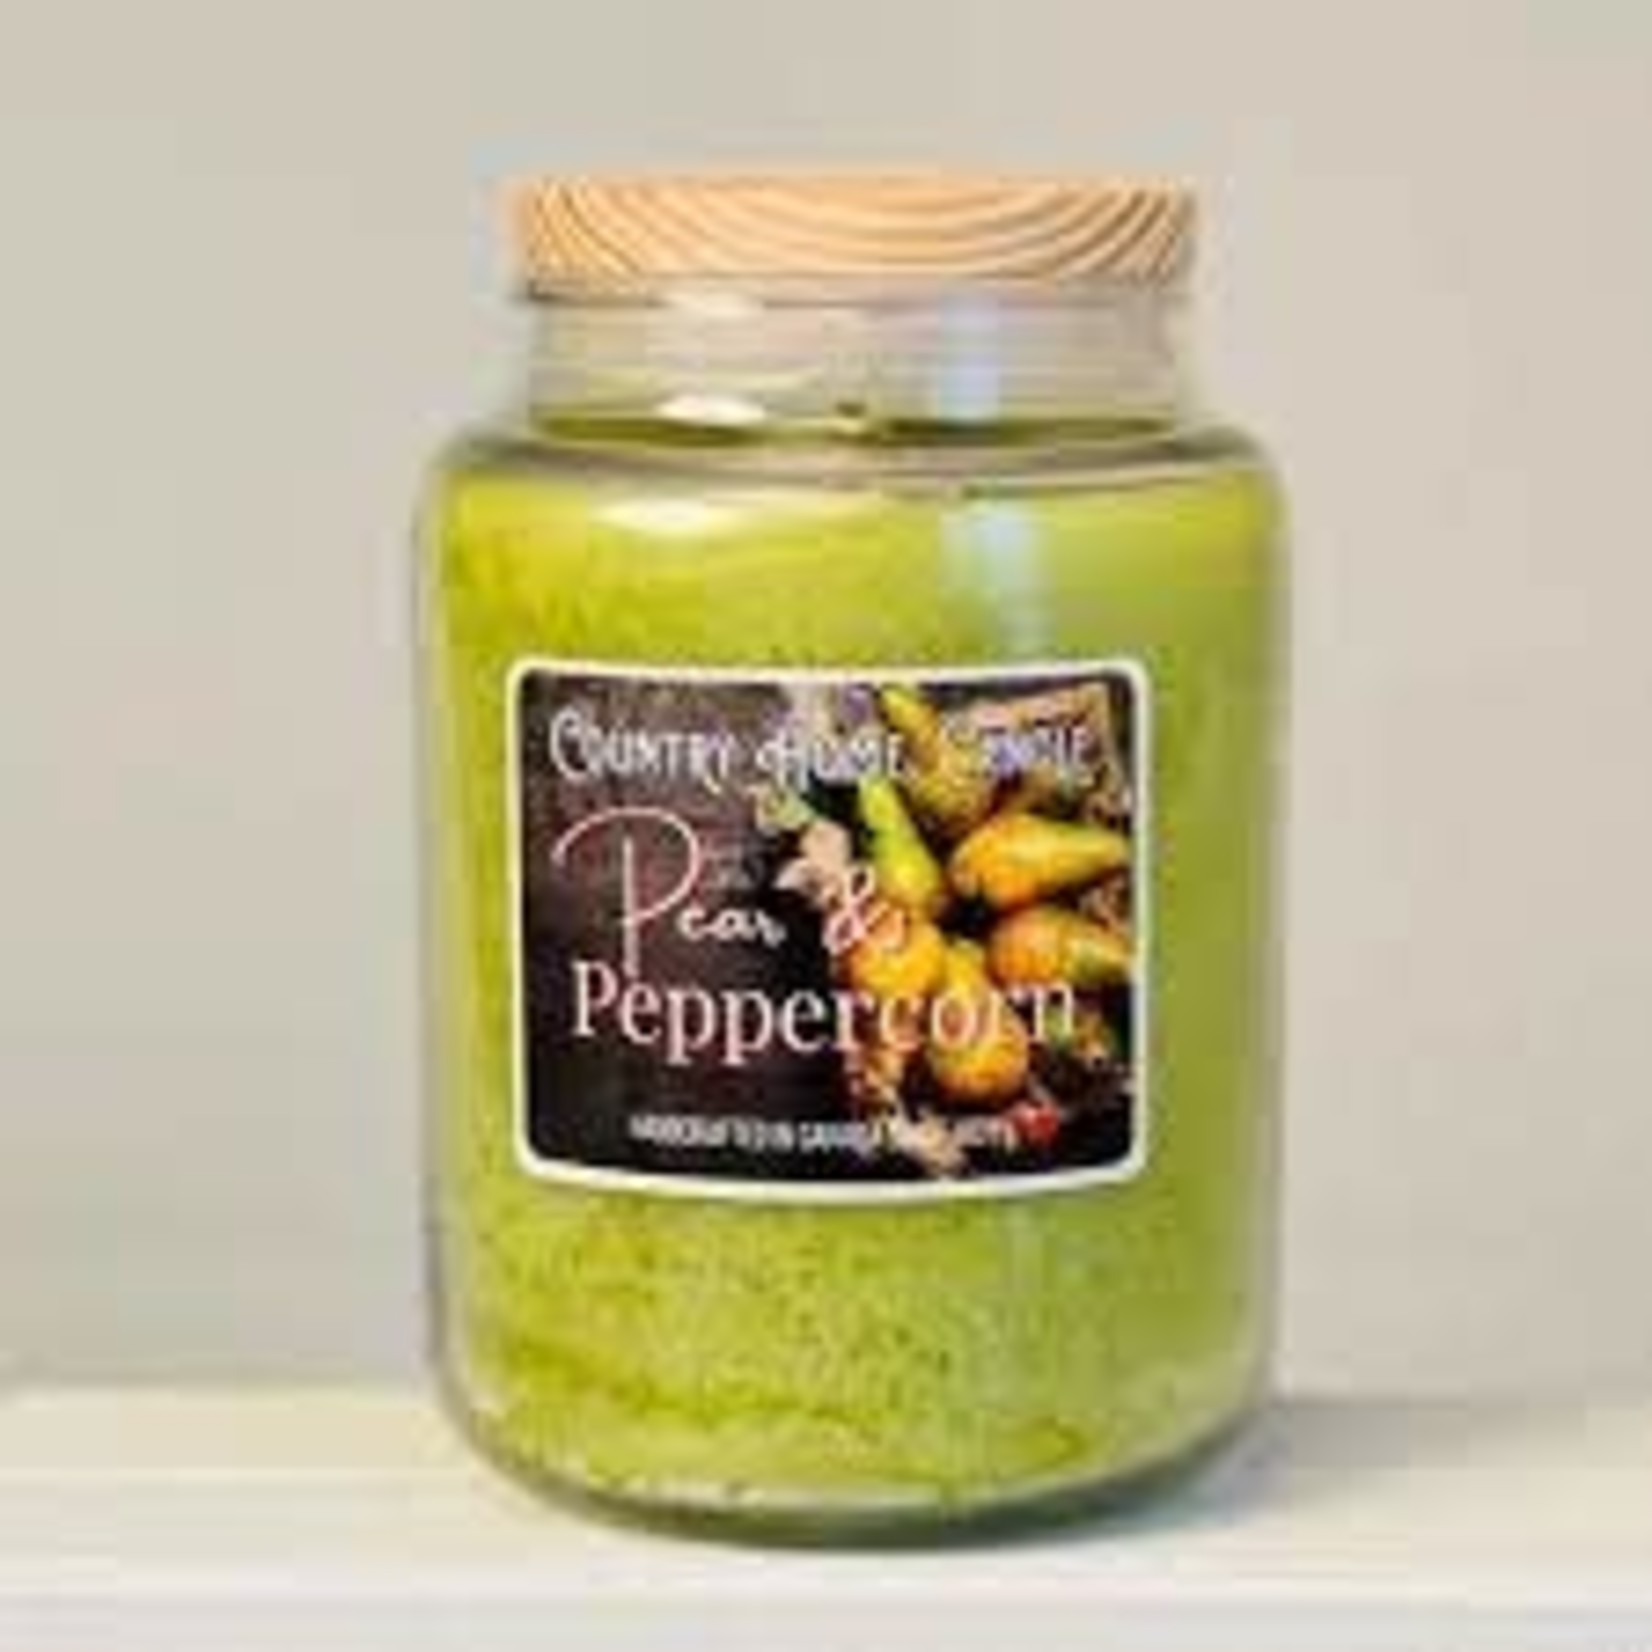 Pear & Peppercorn Candle